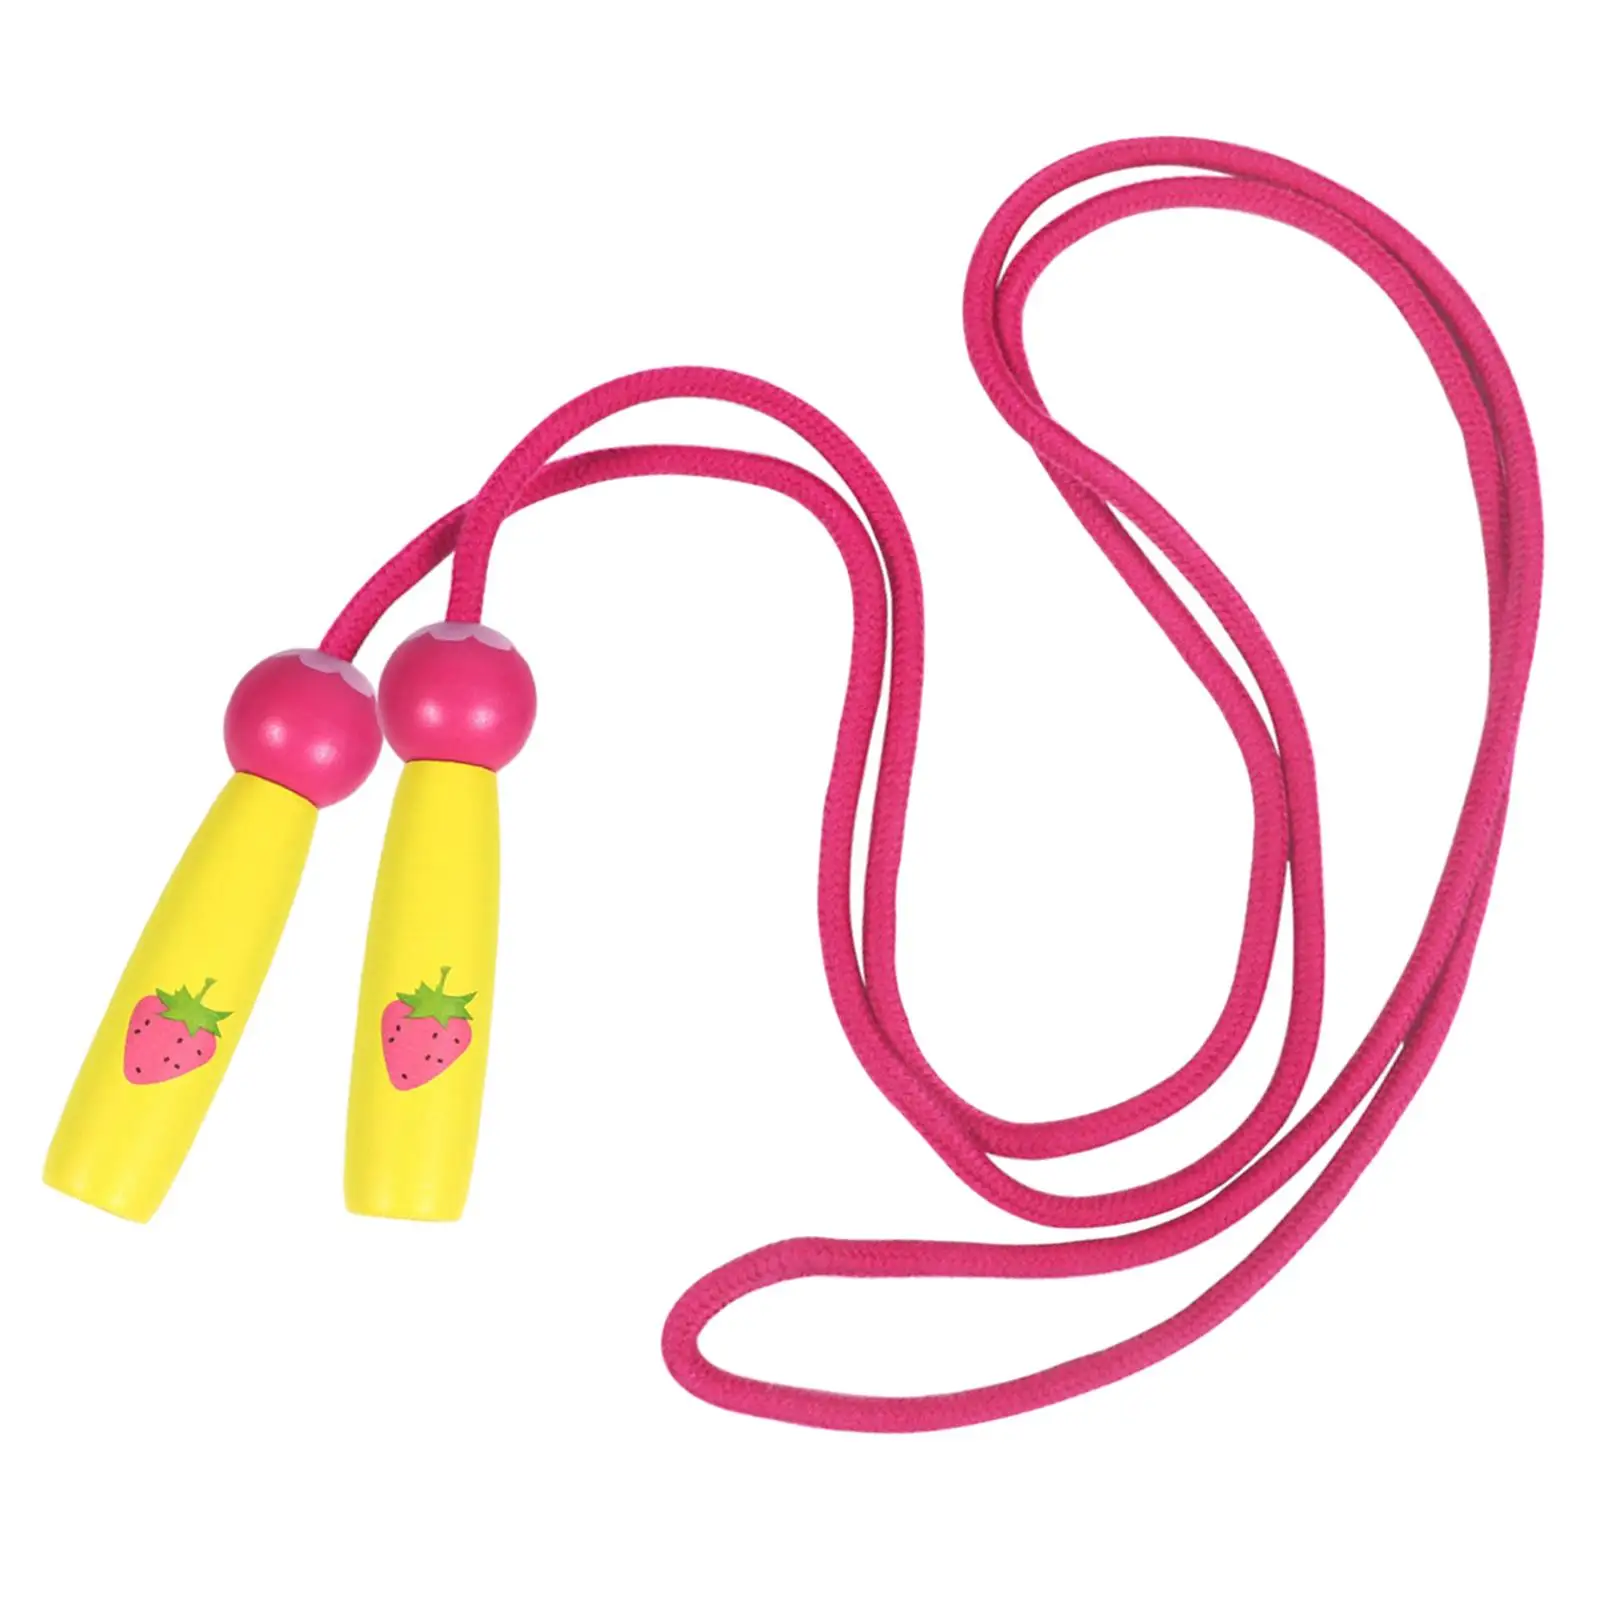 Cotton Jump Rope Adjustable Jumping Rope Activities Favors Skipping Rope